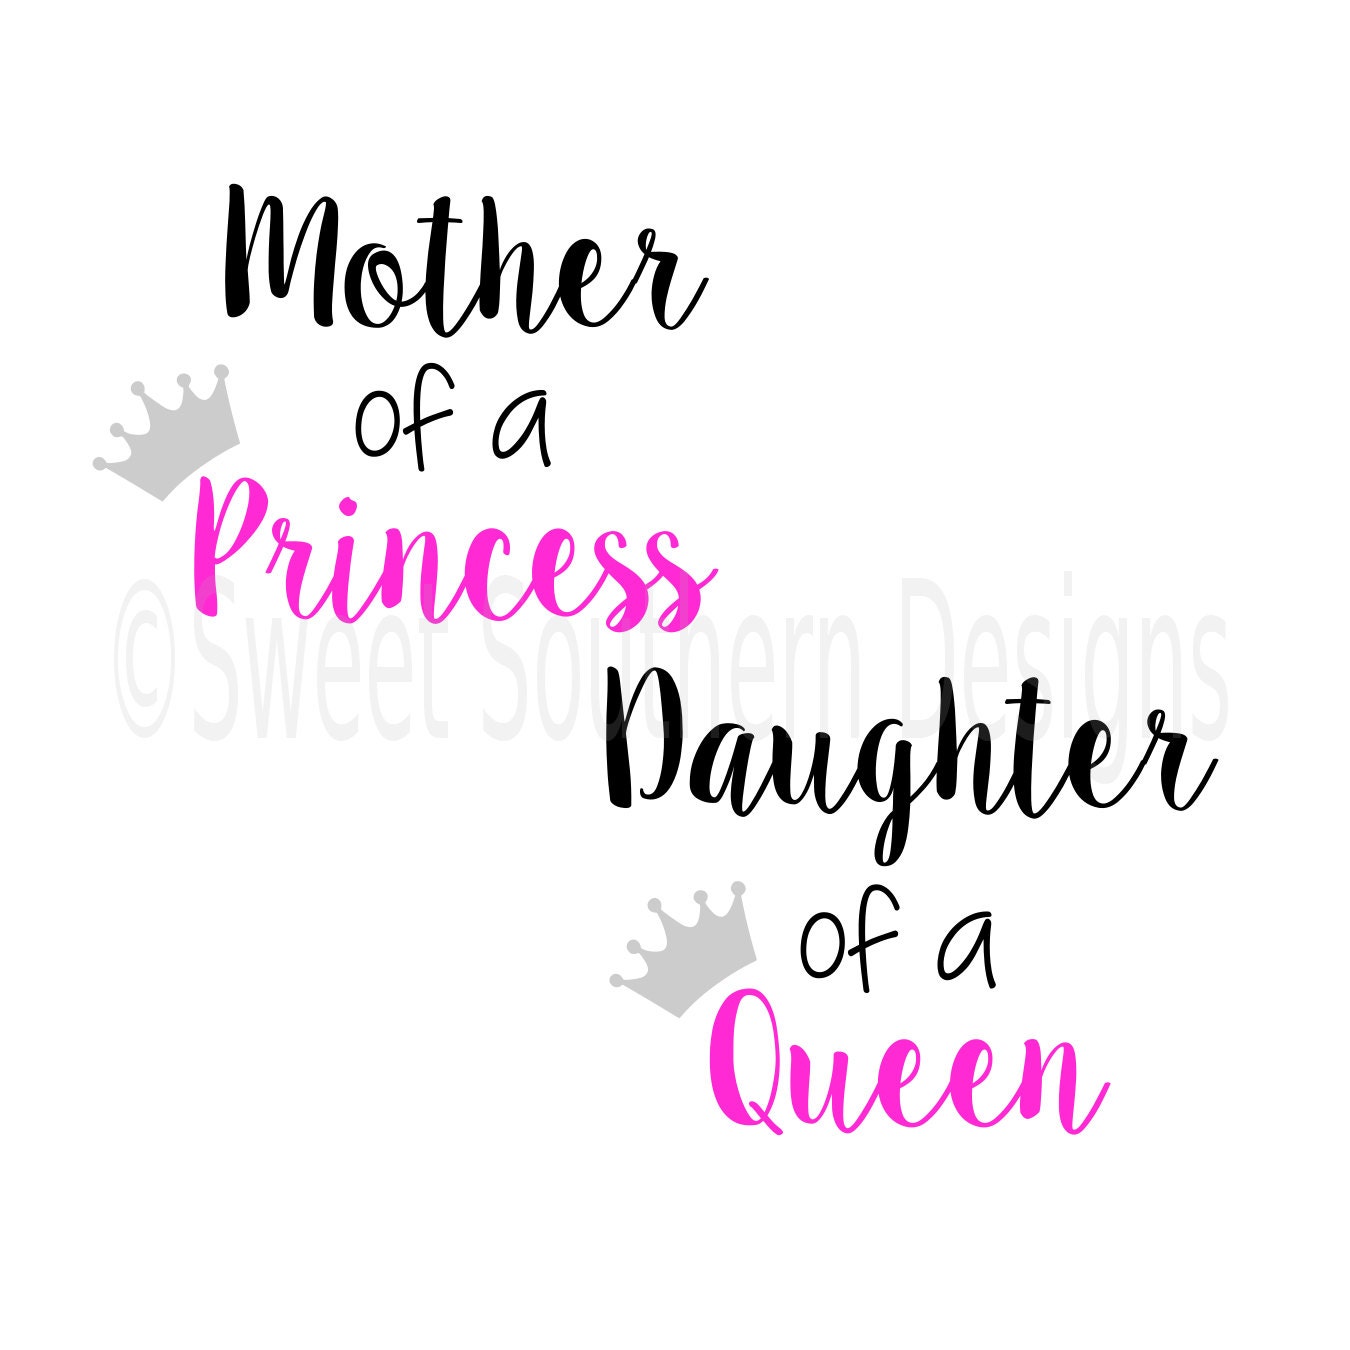 Download Mother of a princess Daughter of a Queen SVG instant download